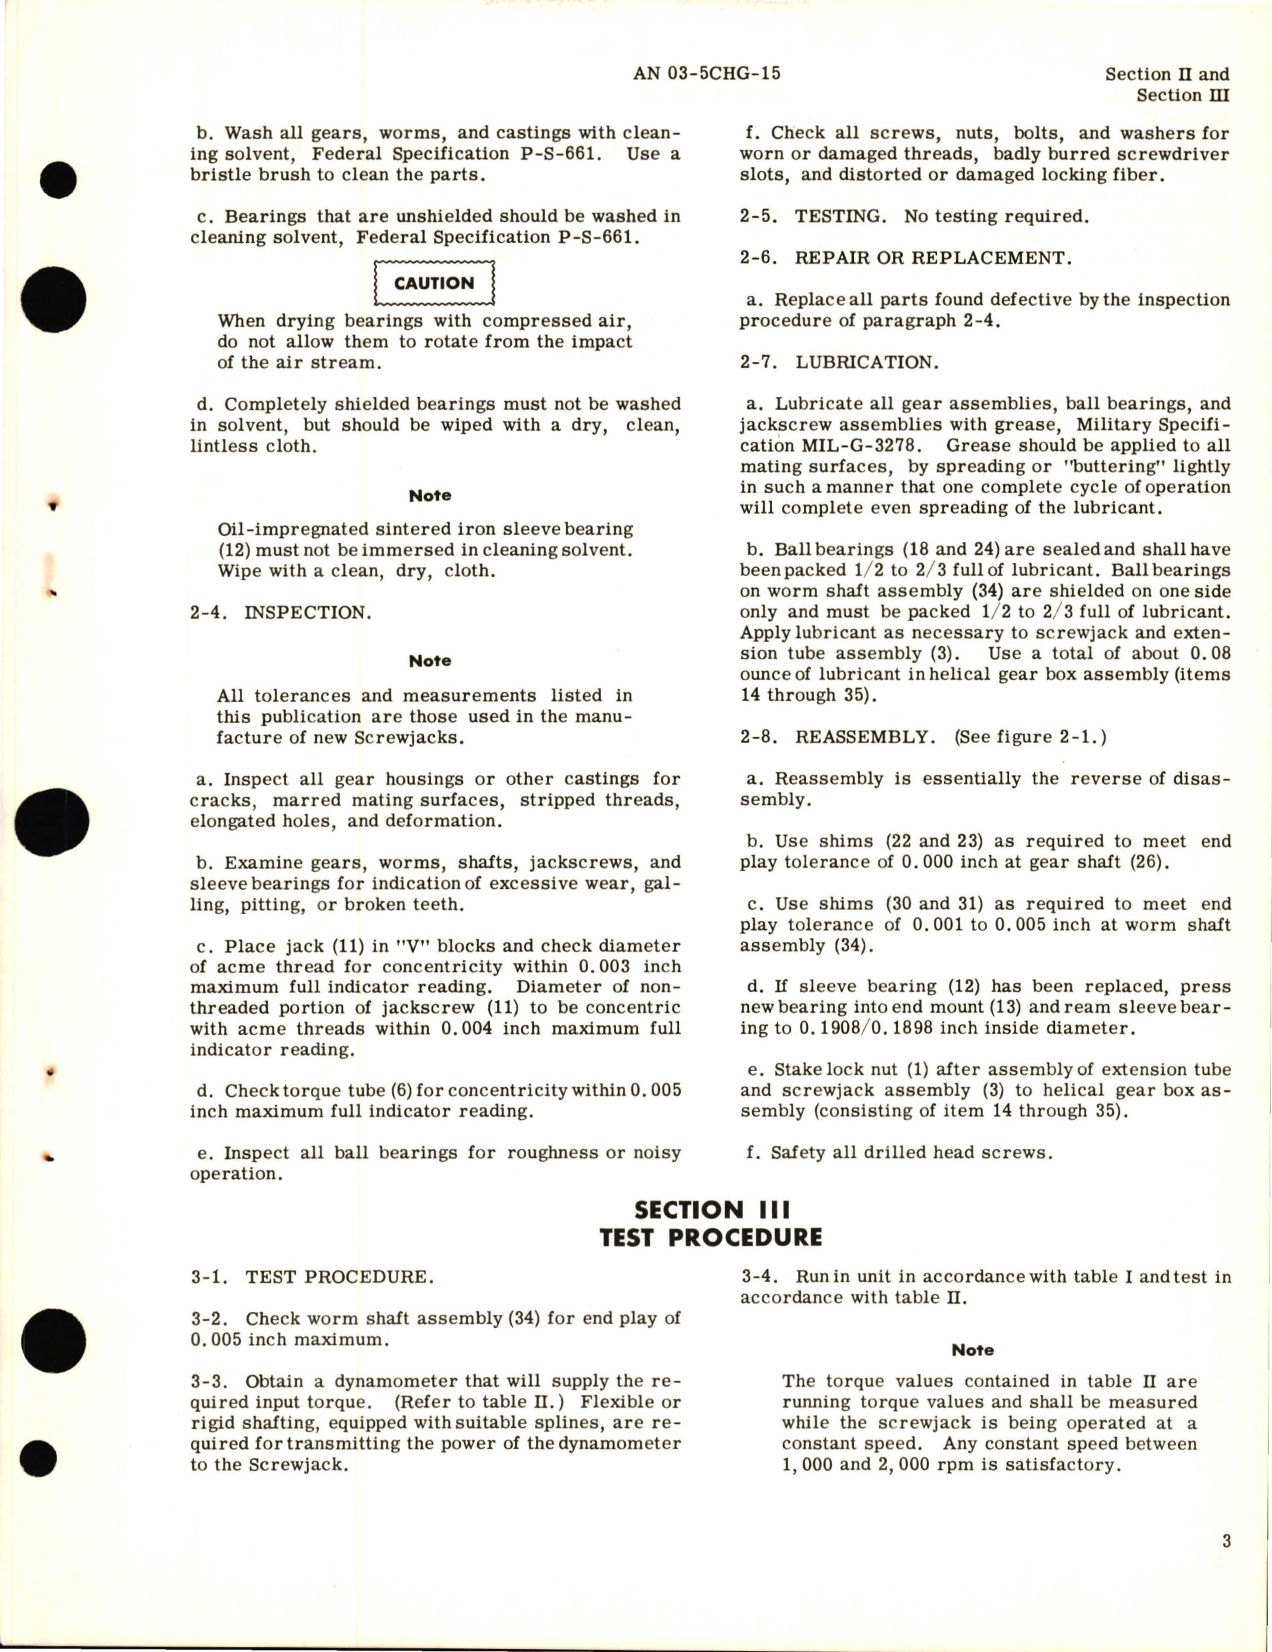 Sample page 5 from AirCorps Library document: Overhaul Instructions for Screwjack, Parts 30596-02, 30596-03, 31129-01, 31129-03, 31129-04, and 72909-01